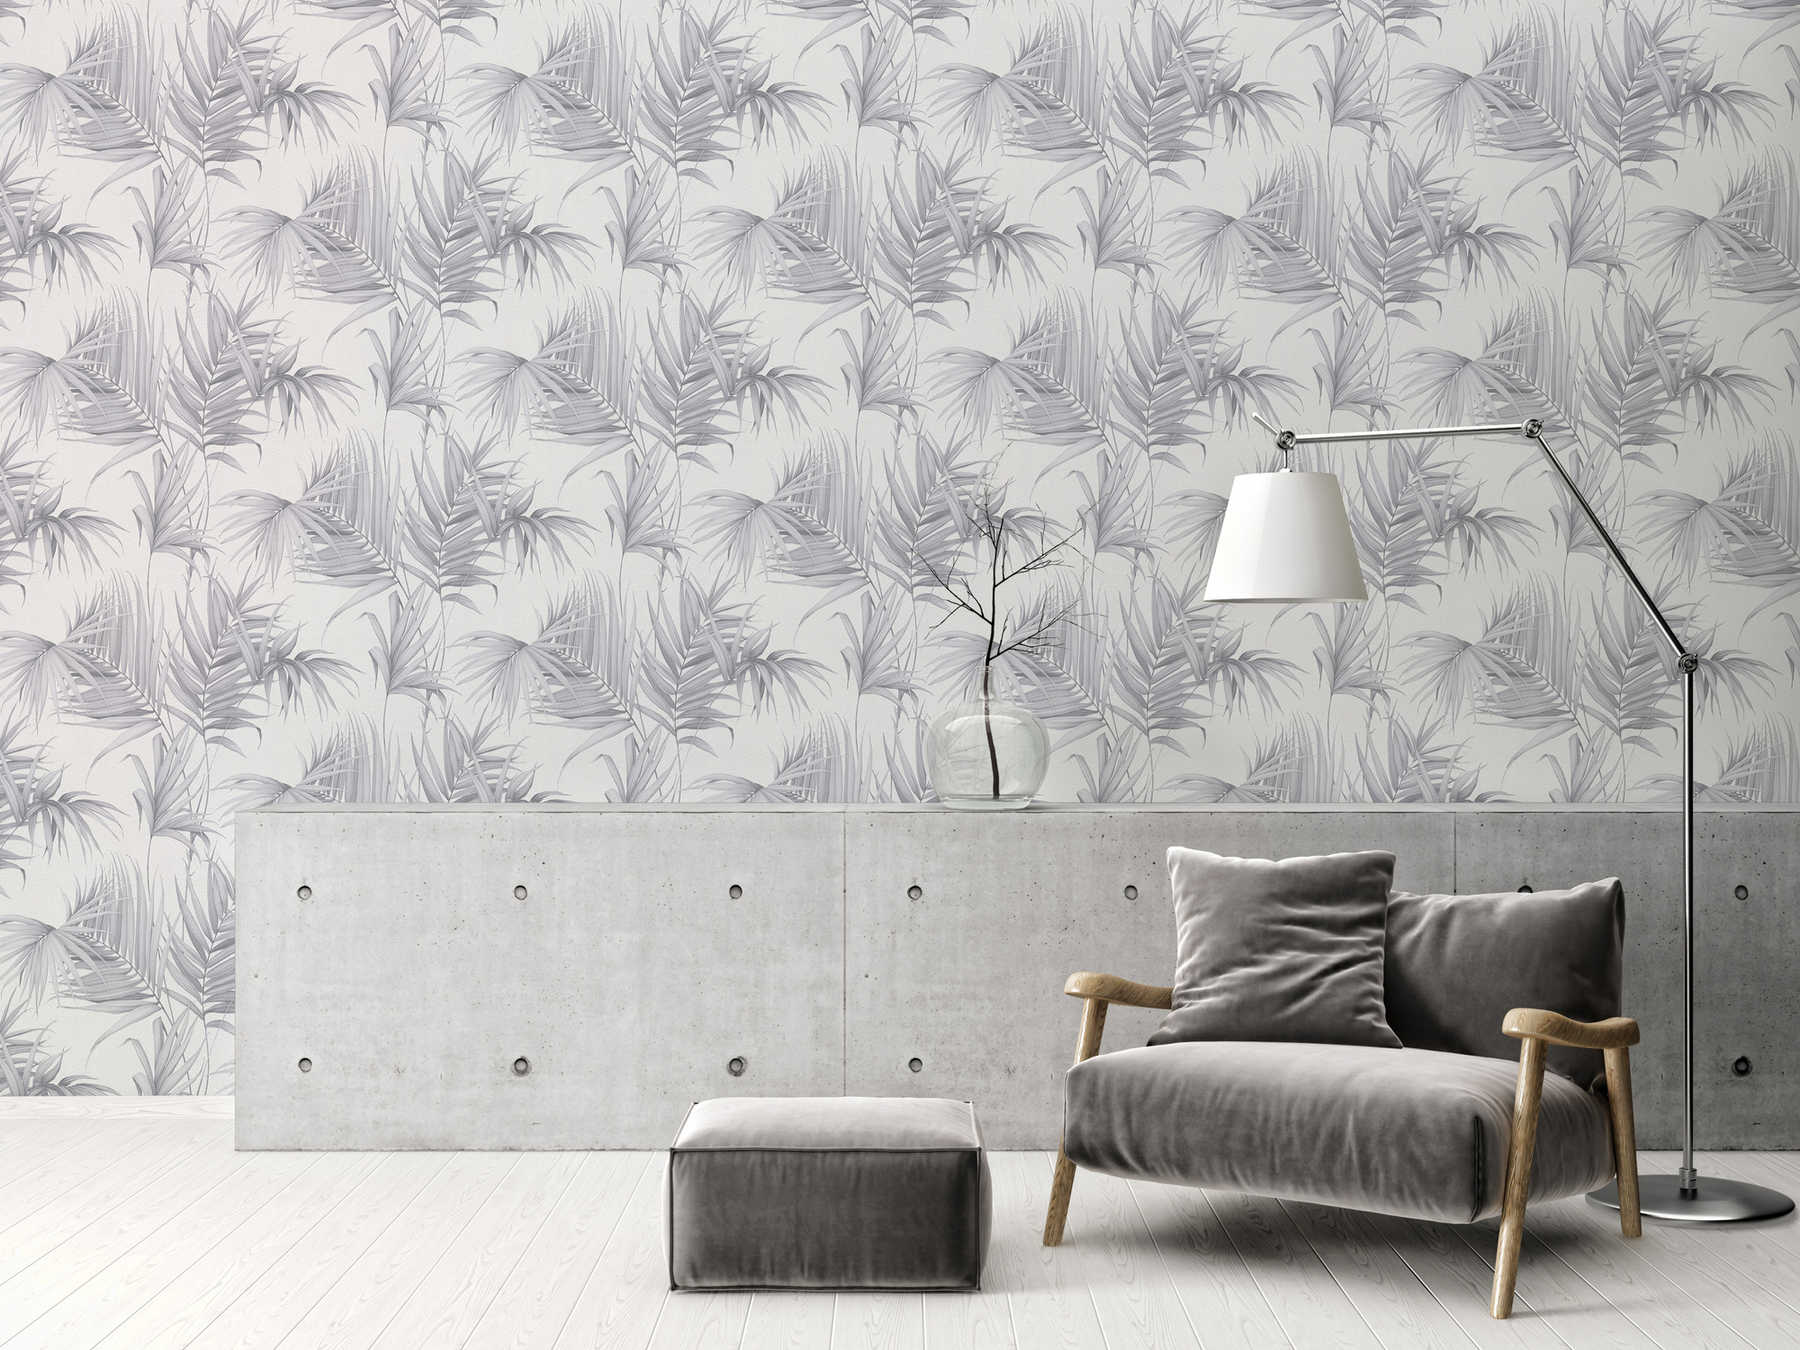             Non-woven wallpaper grey leaves pattern from MICHALSKY - grey
        